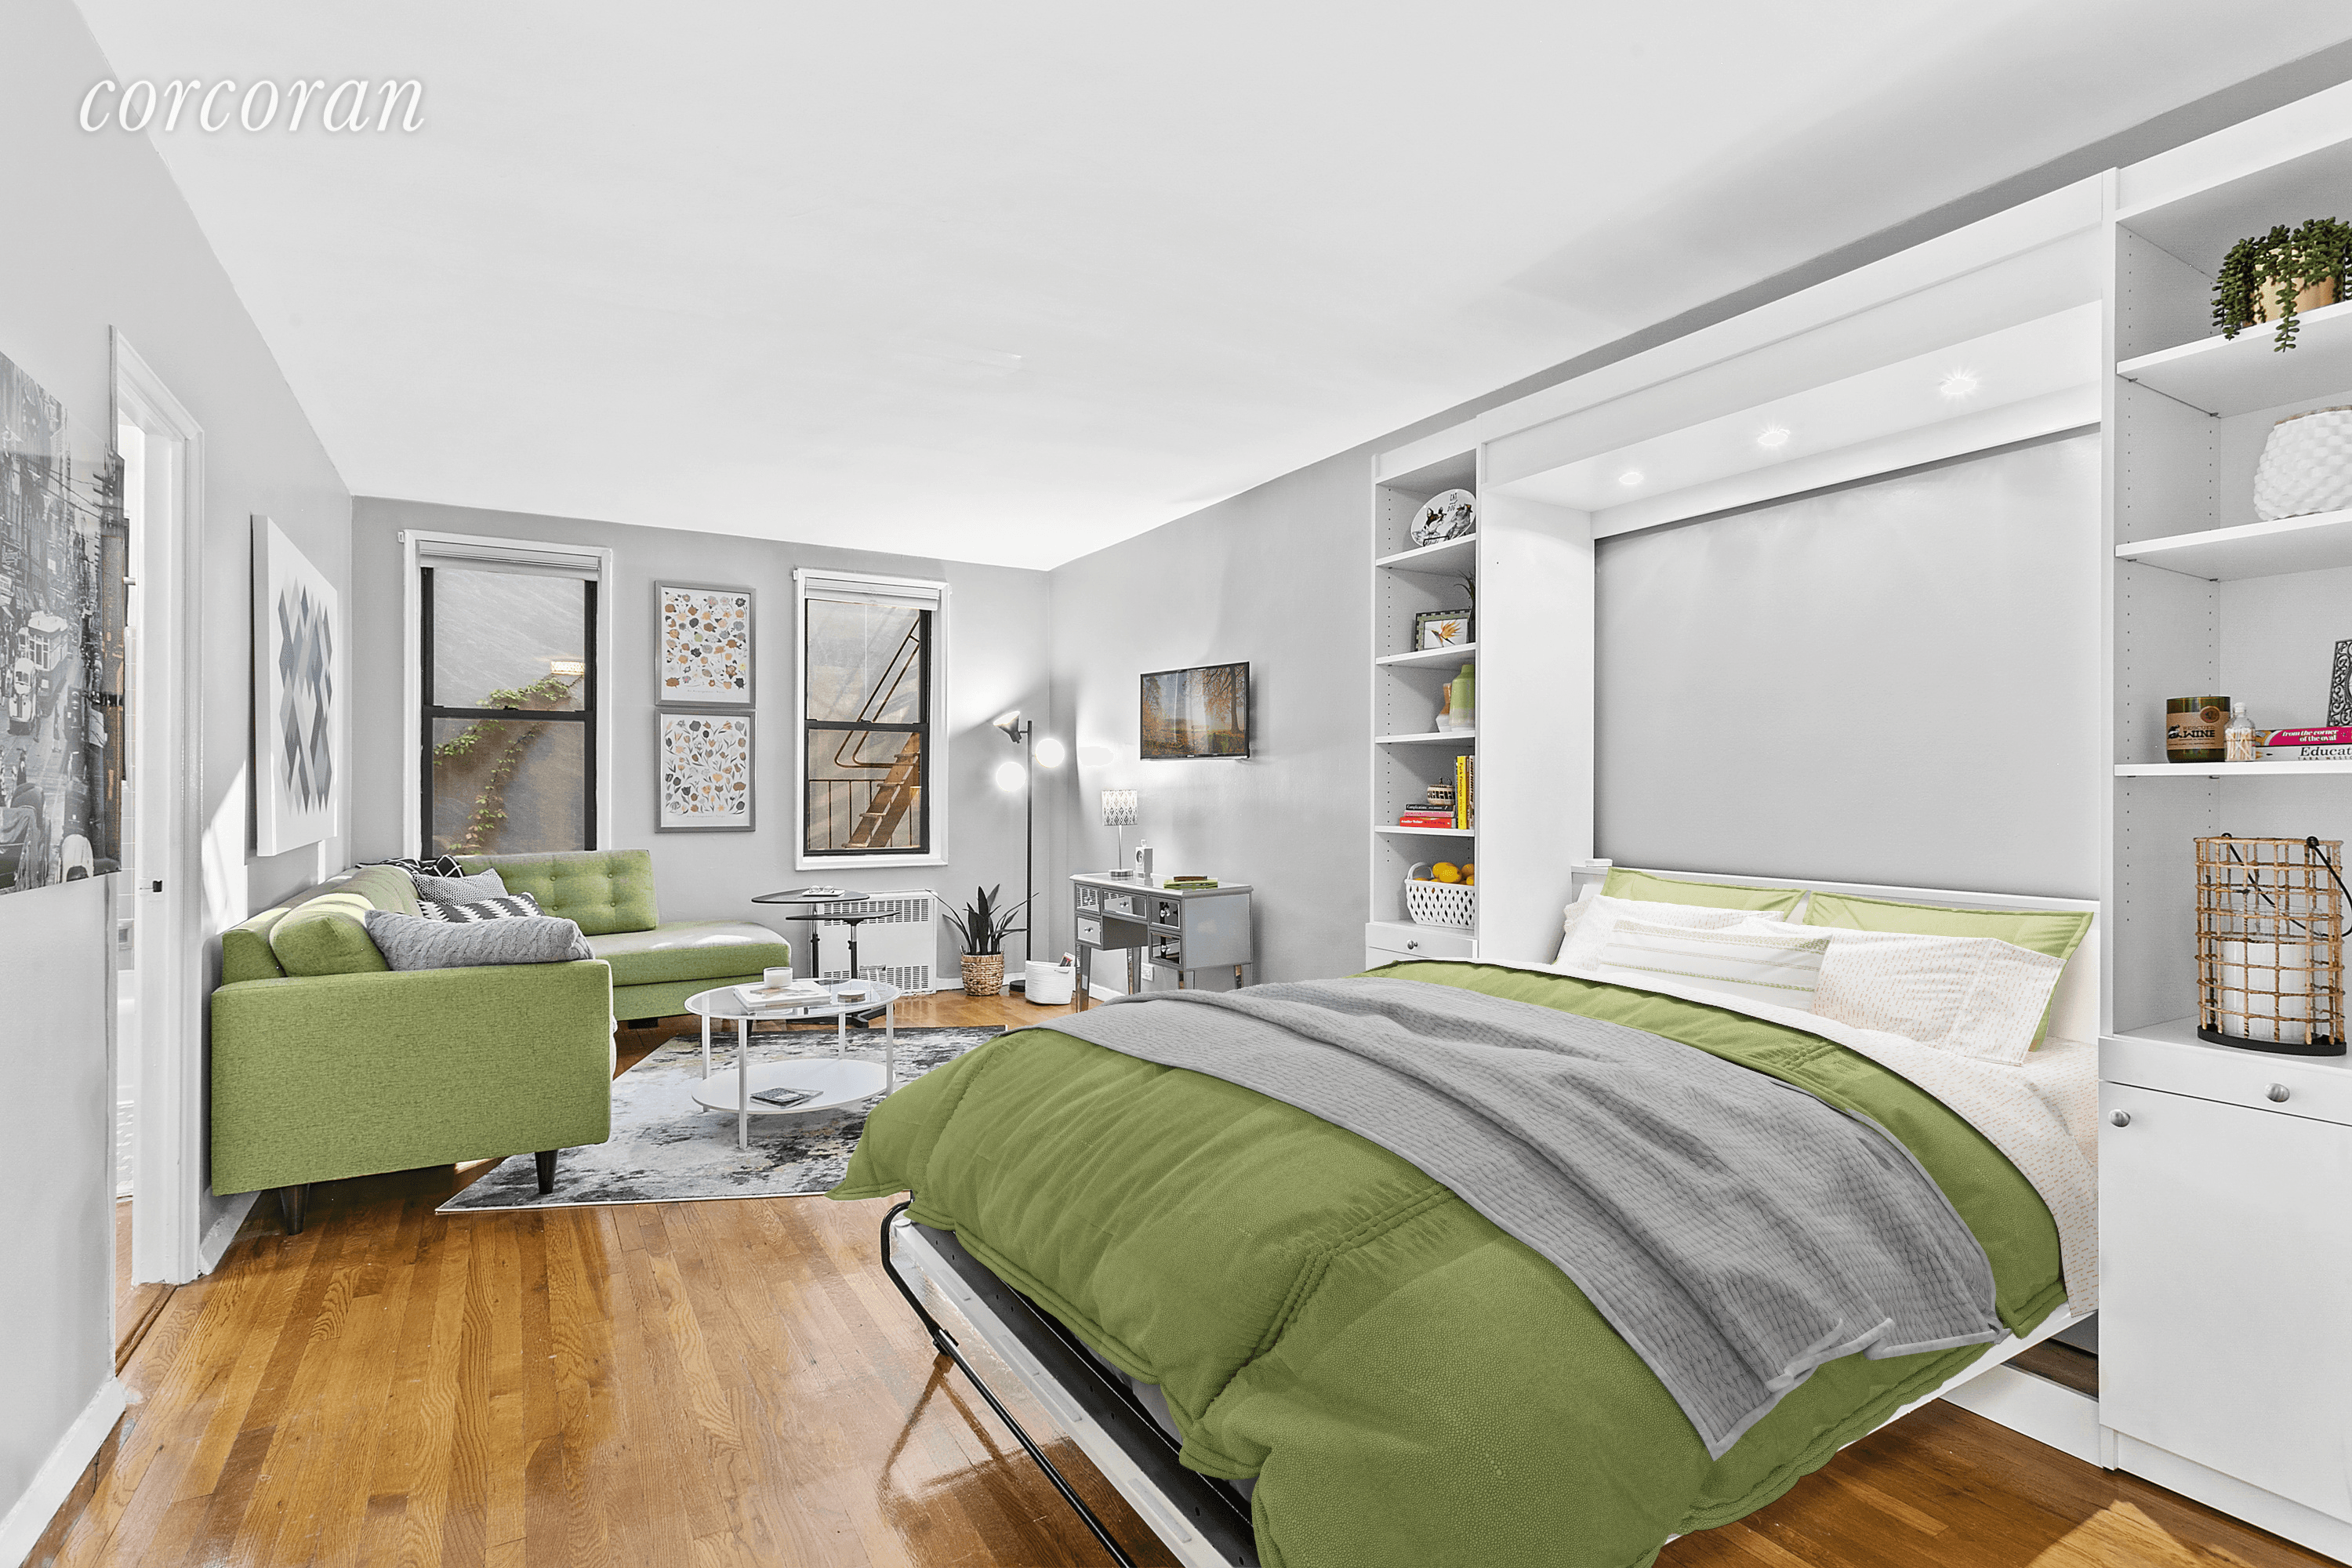 242 East 38th Street, 3G is a large studio that features two exposures and has a windowed kitchen and bath !